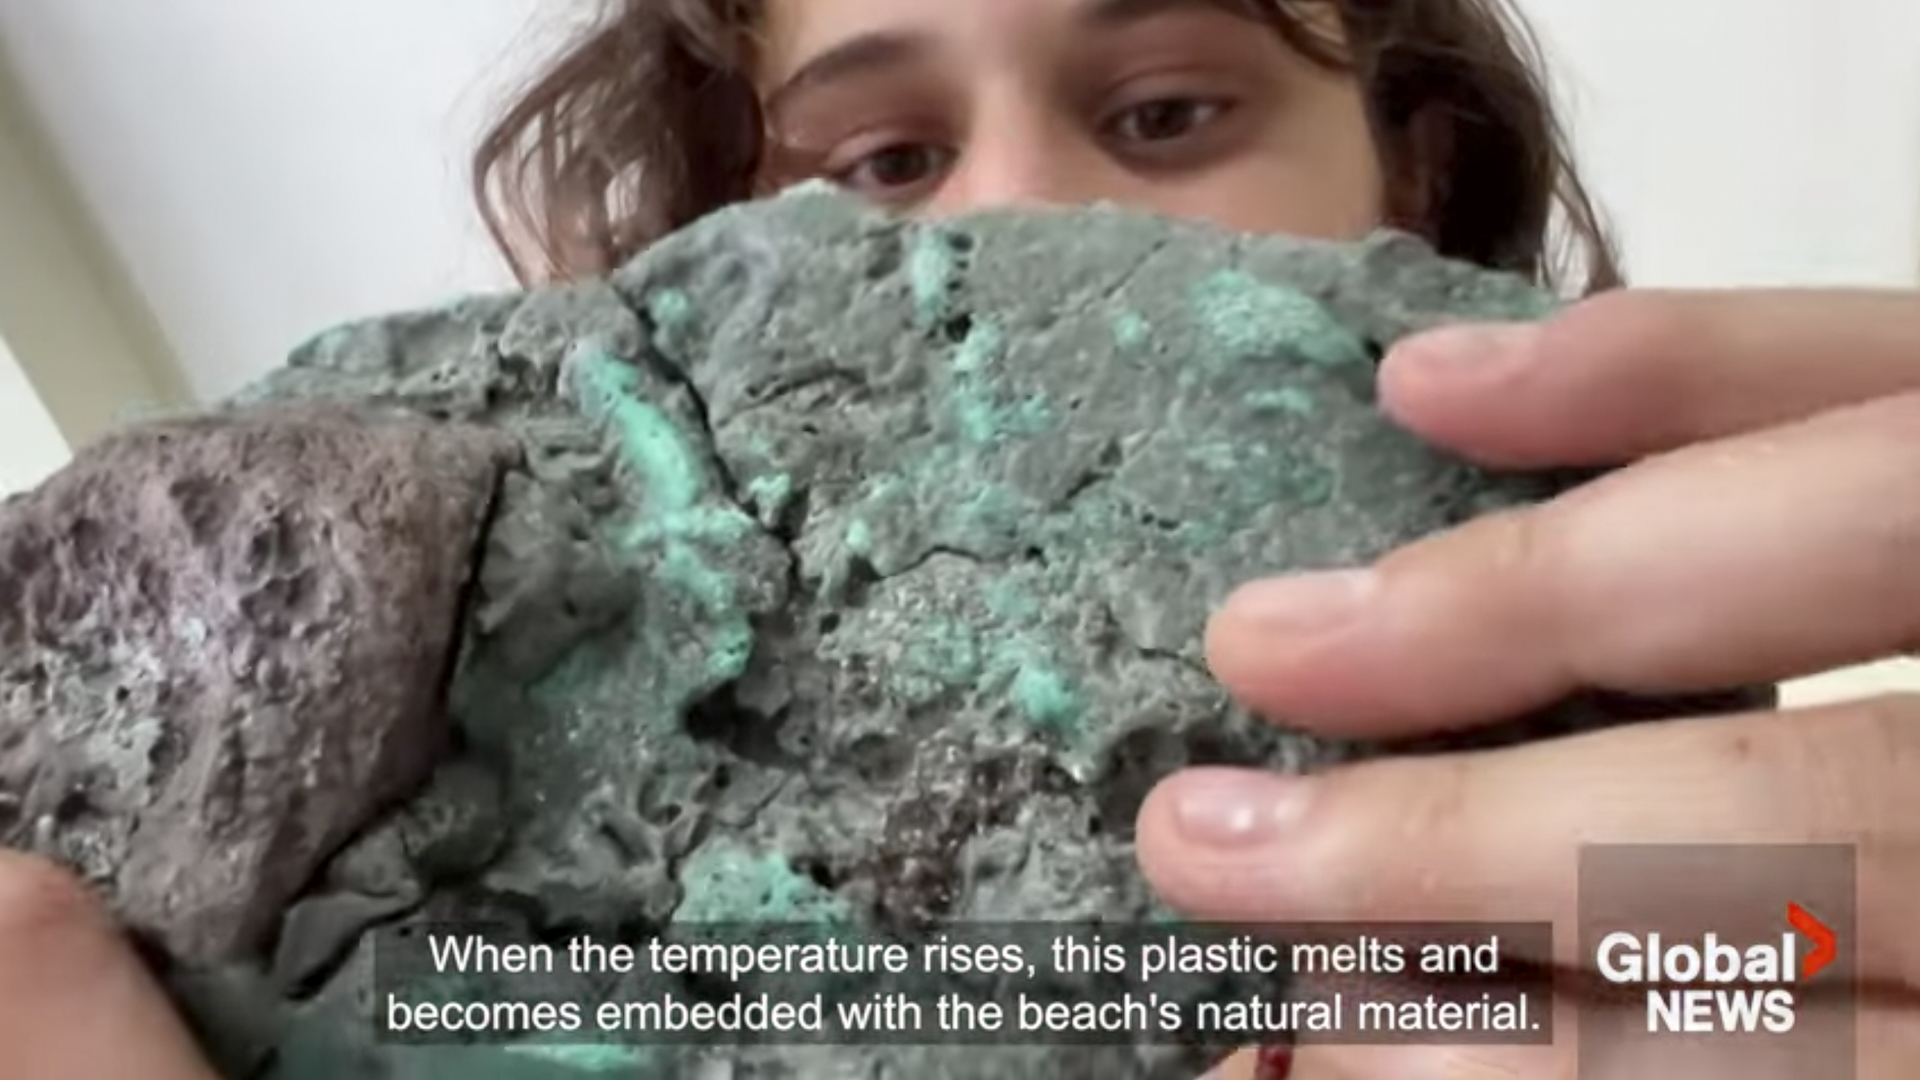 Rocks called "plastiglomerates" - because they are made of a mixture of sedimentary granules and other debris held together by plastic, mainly fishing nets - have been found in Brazil's volcanic Trindade Island. Researchers view this as evidence of humans' growing influence over the earth's geological cycles (screenshot taken from Global News video "Mutated "plastic rocks" discovered on remote Brazilian island," March 23, 2023, via Youtube).